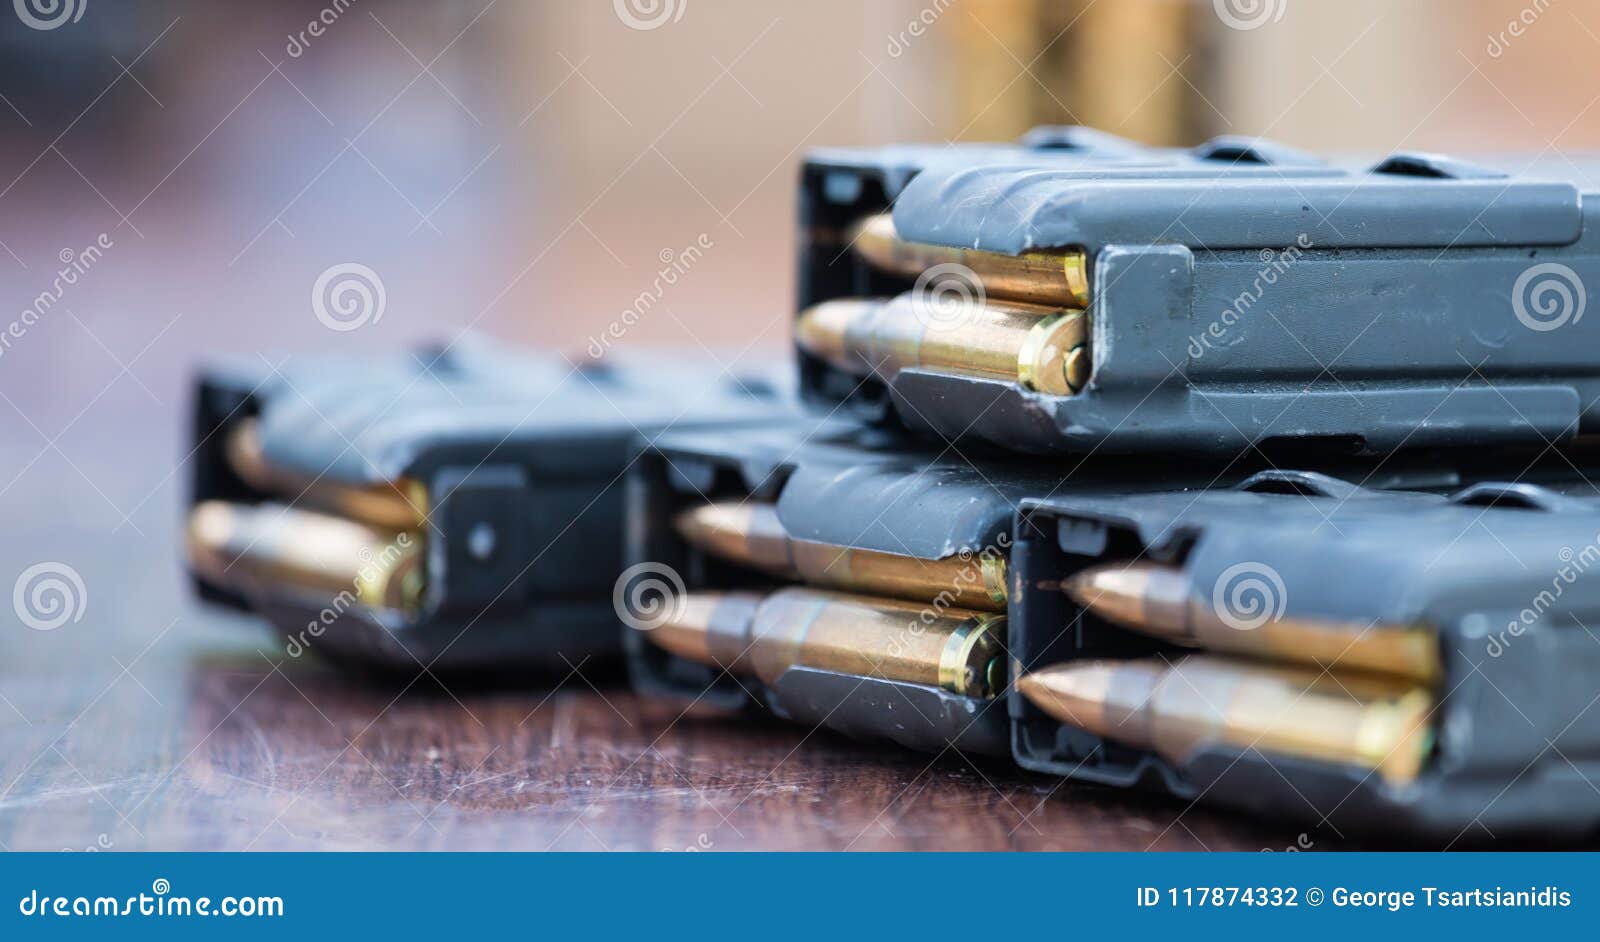 magazines with bullets of firearm putted on wooden table. close up view, blurred background.